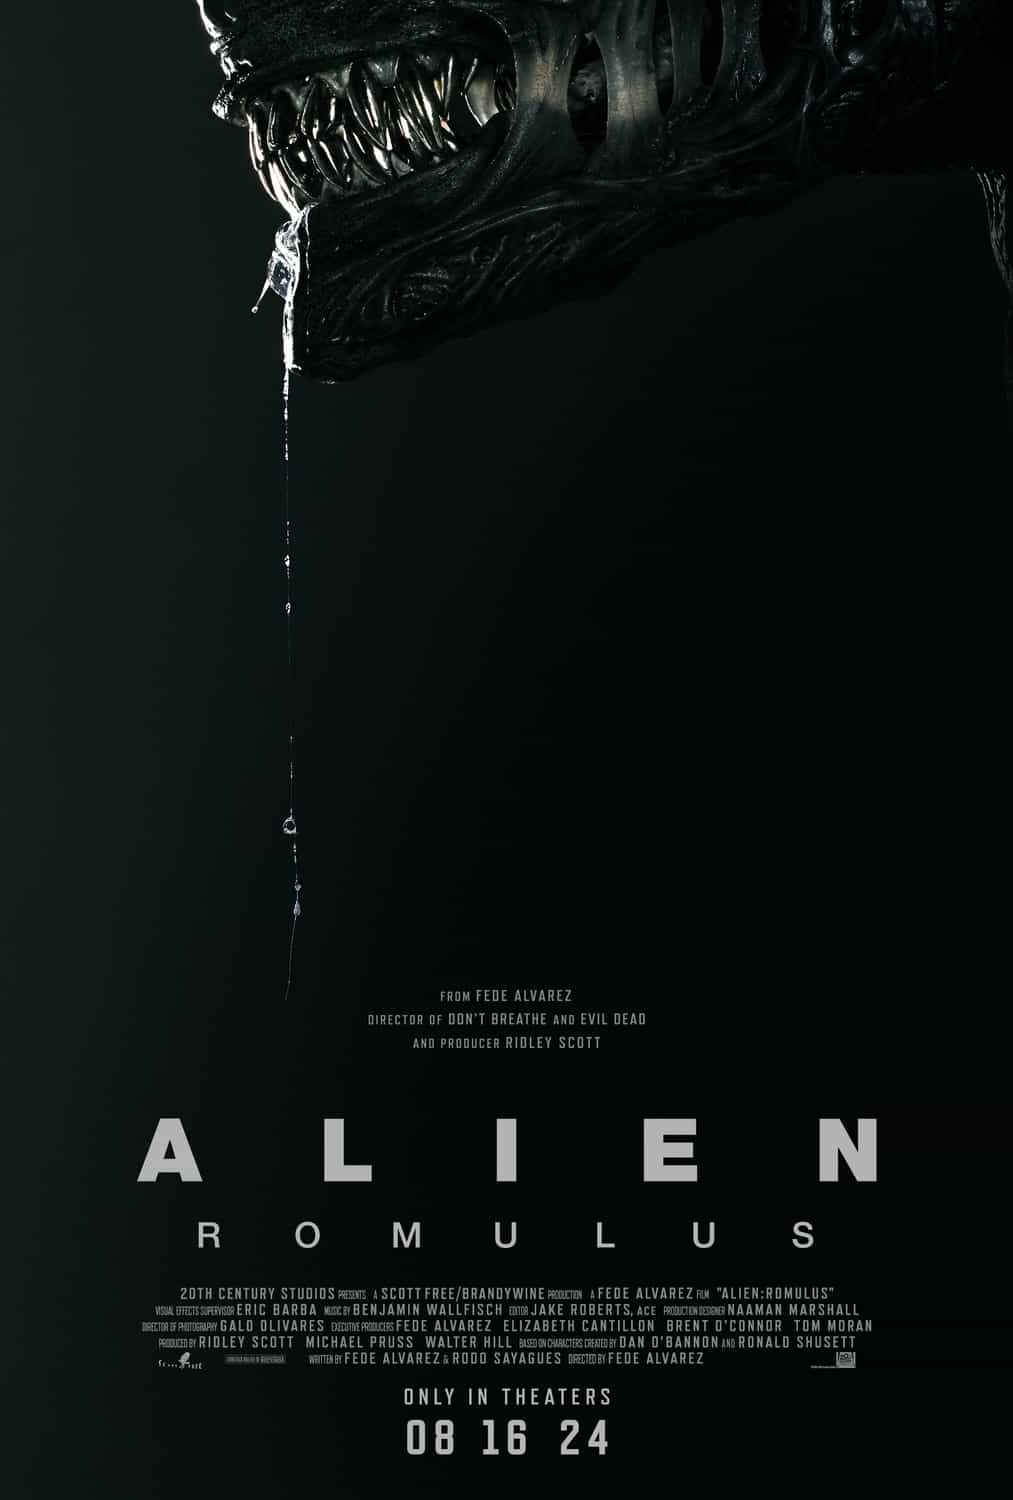 Check out the new trailer and poster for upcoming movie Alien: Romulus which stars Cailee Spaeny and Isabela Merced - movie UK release date 16th August 2024 #alienromulus